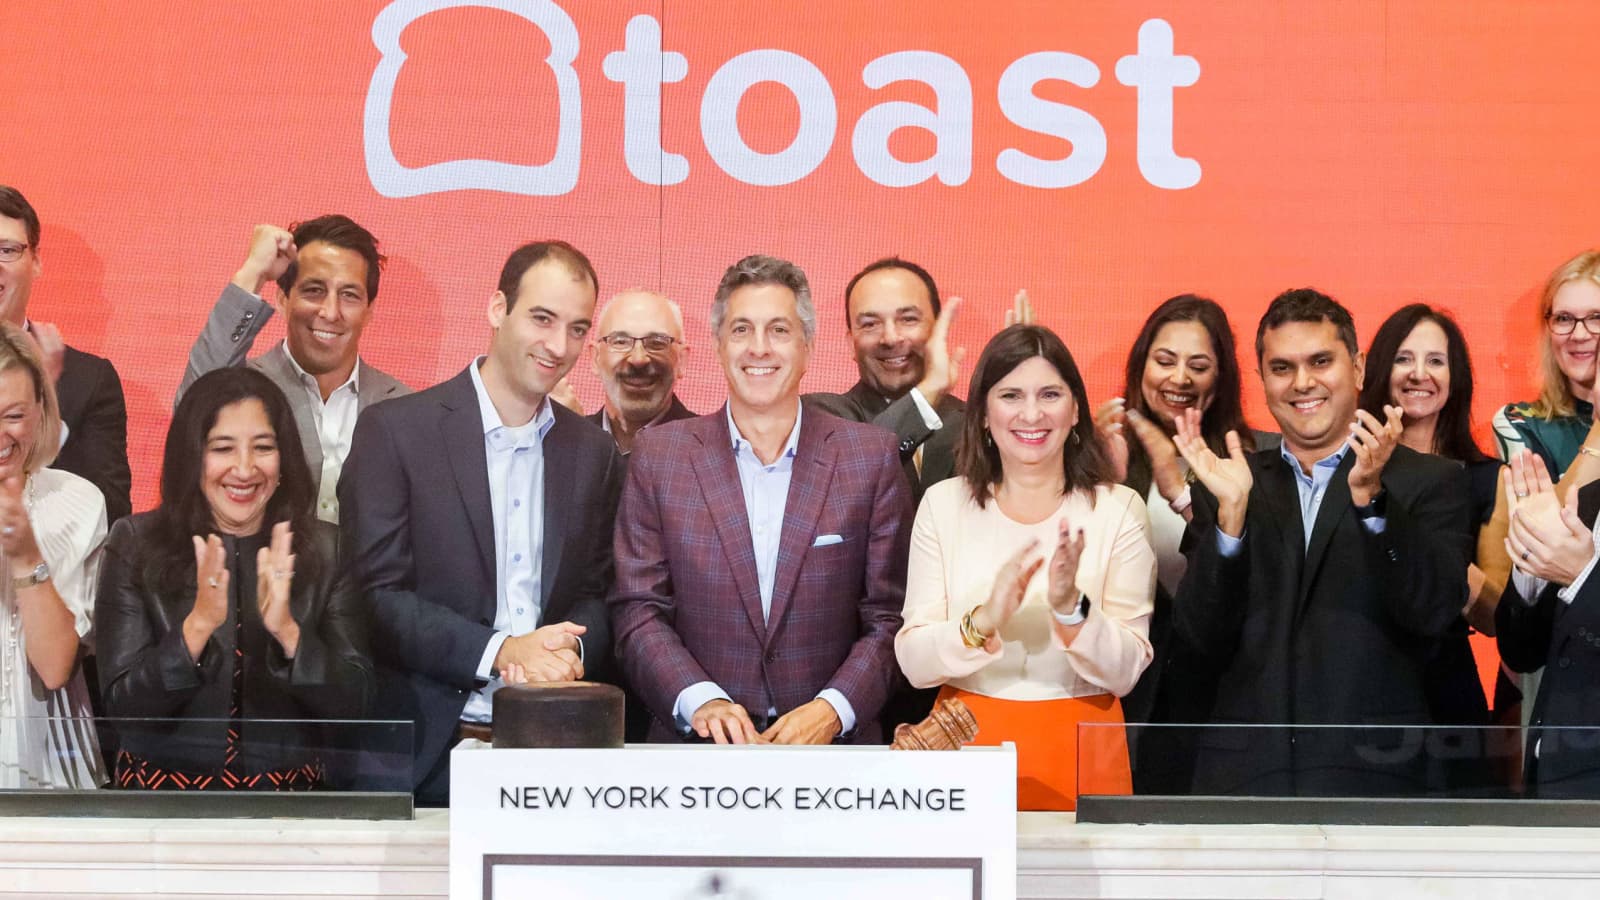 Toast prices ipo everfi module 9 answers investing money